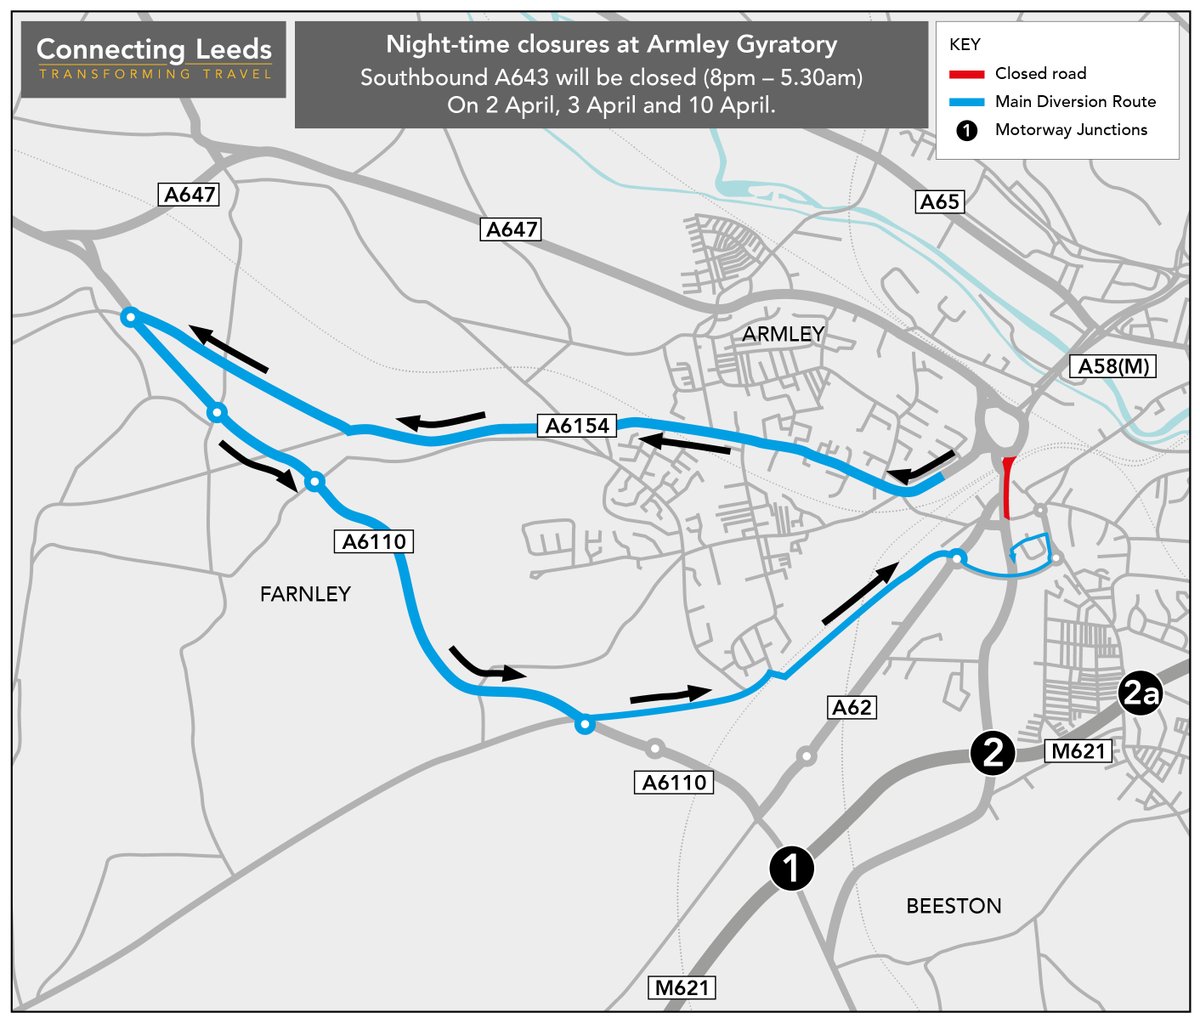 ⚠️ Reminder: night-time closures at Armley Gyratory begin today (2 April). 📅 Southbound A643 will be closed for 3 nights (8pm – 5.30am) on: 2 April 3 April 10 April ↩️ Diversions will be in place and signposted. Find out more: orlo.uk/f1TxN